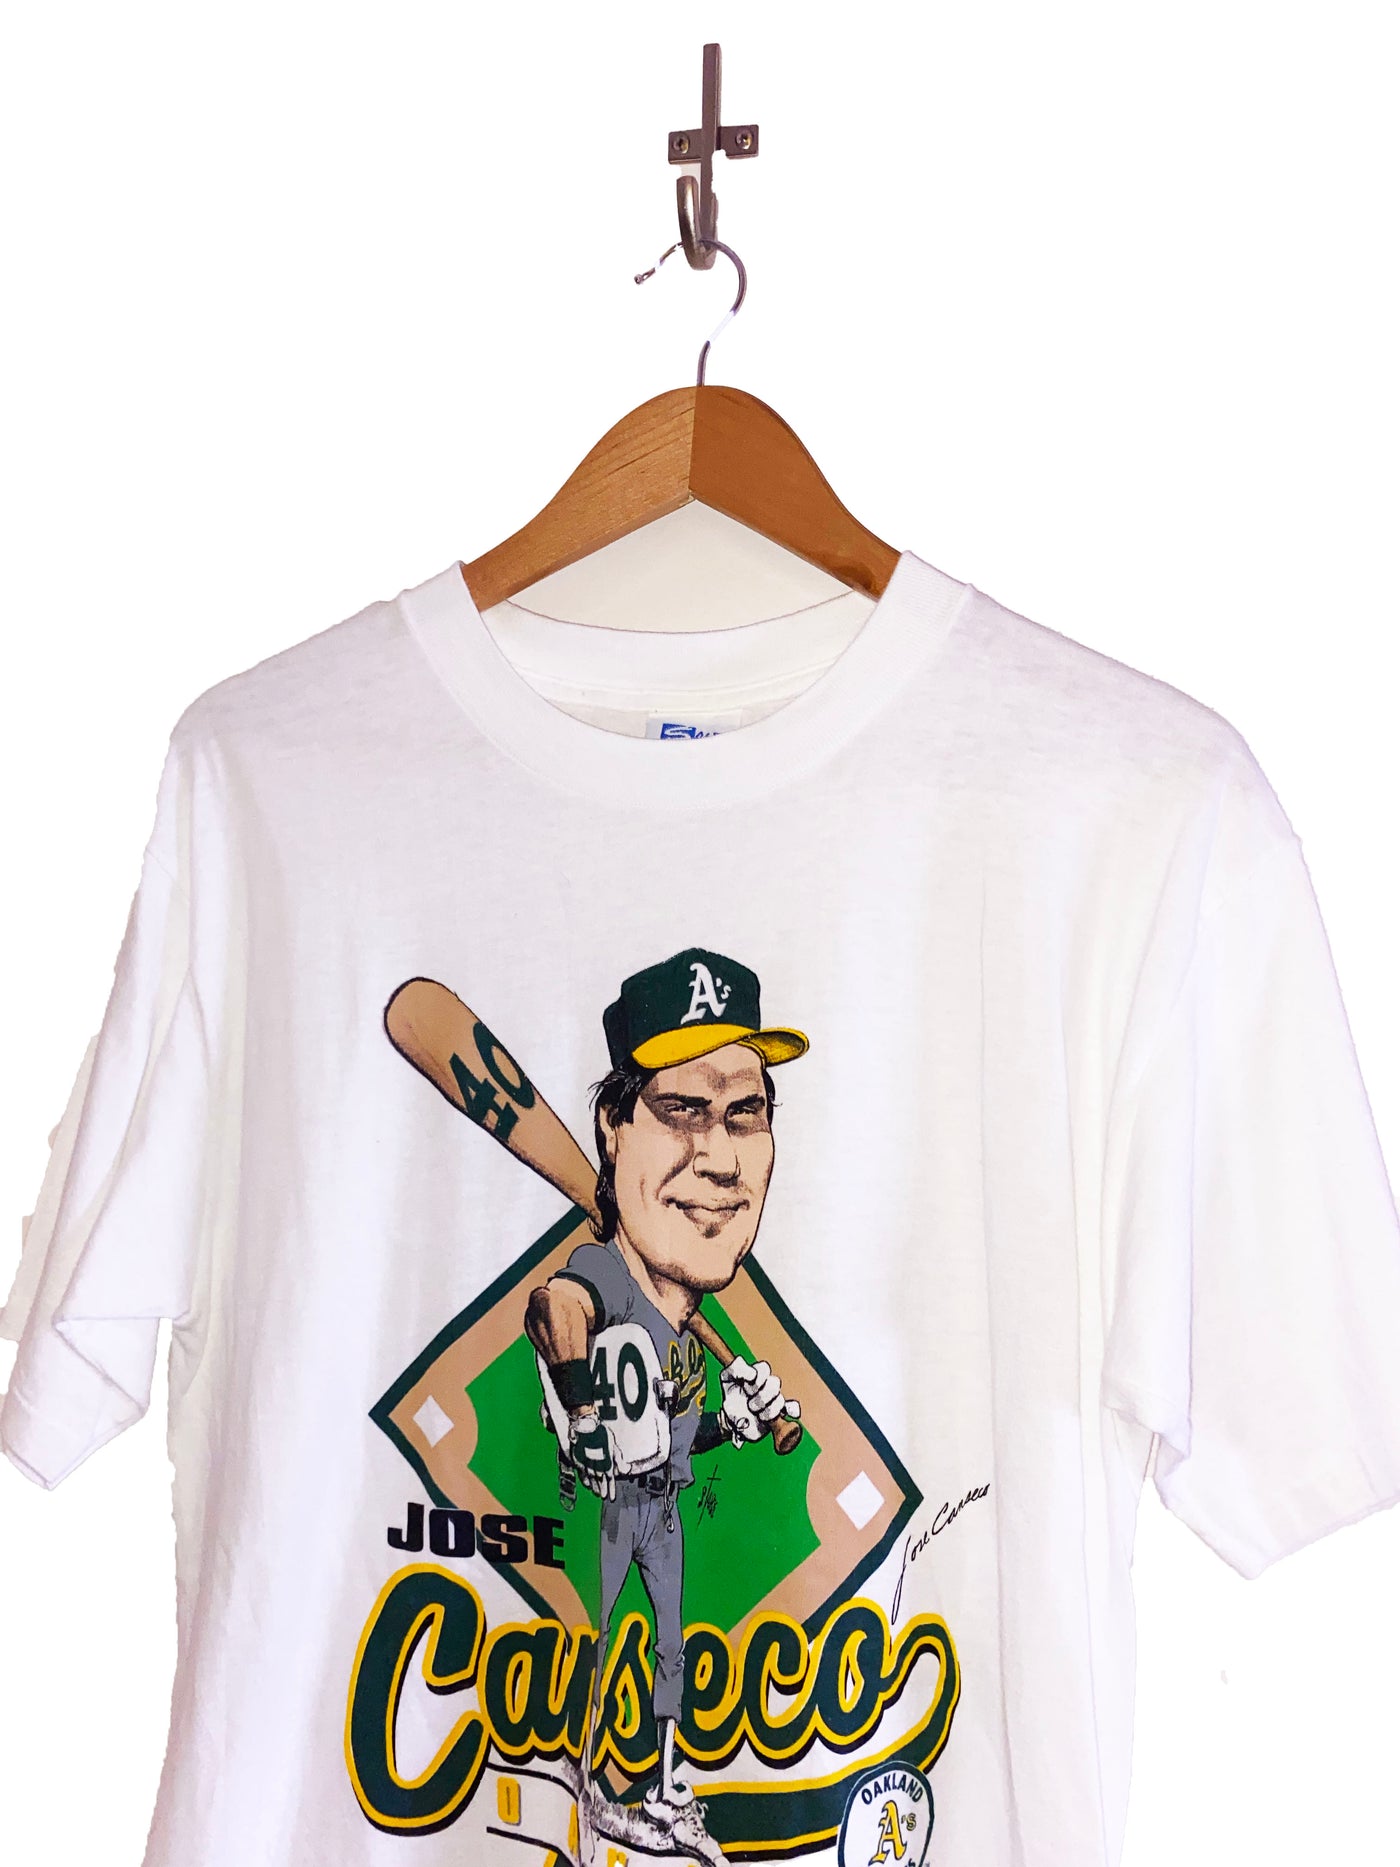 Vintage 1990 Jose Canseco T-Shirt